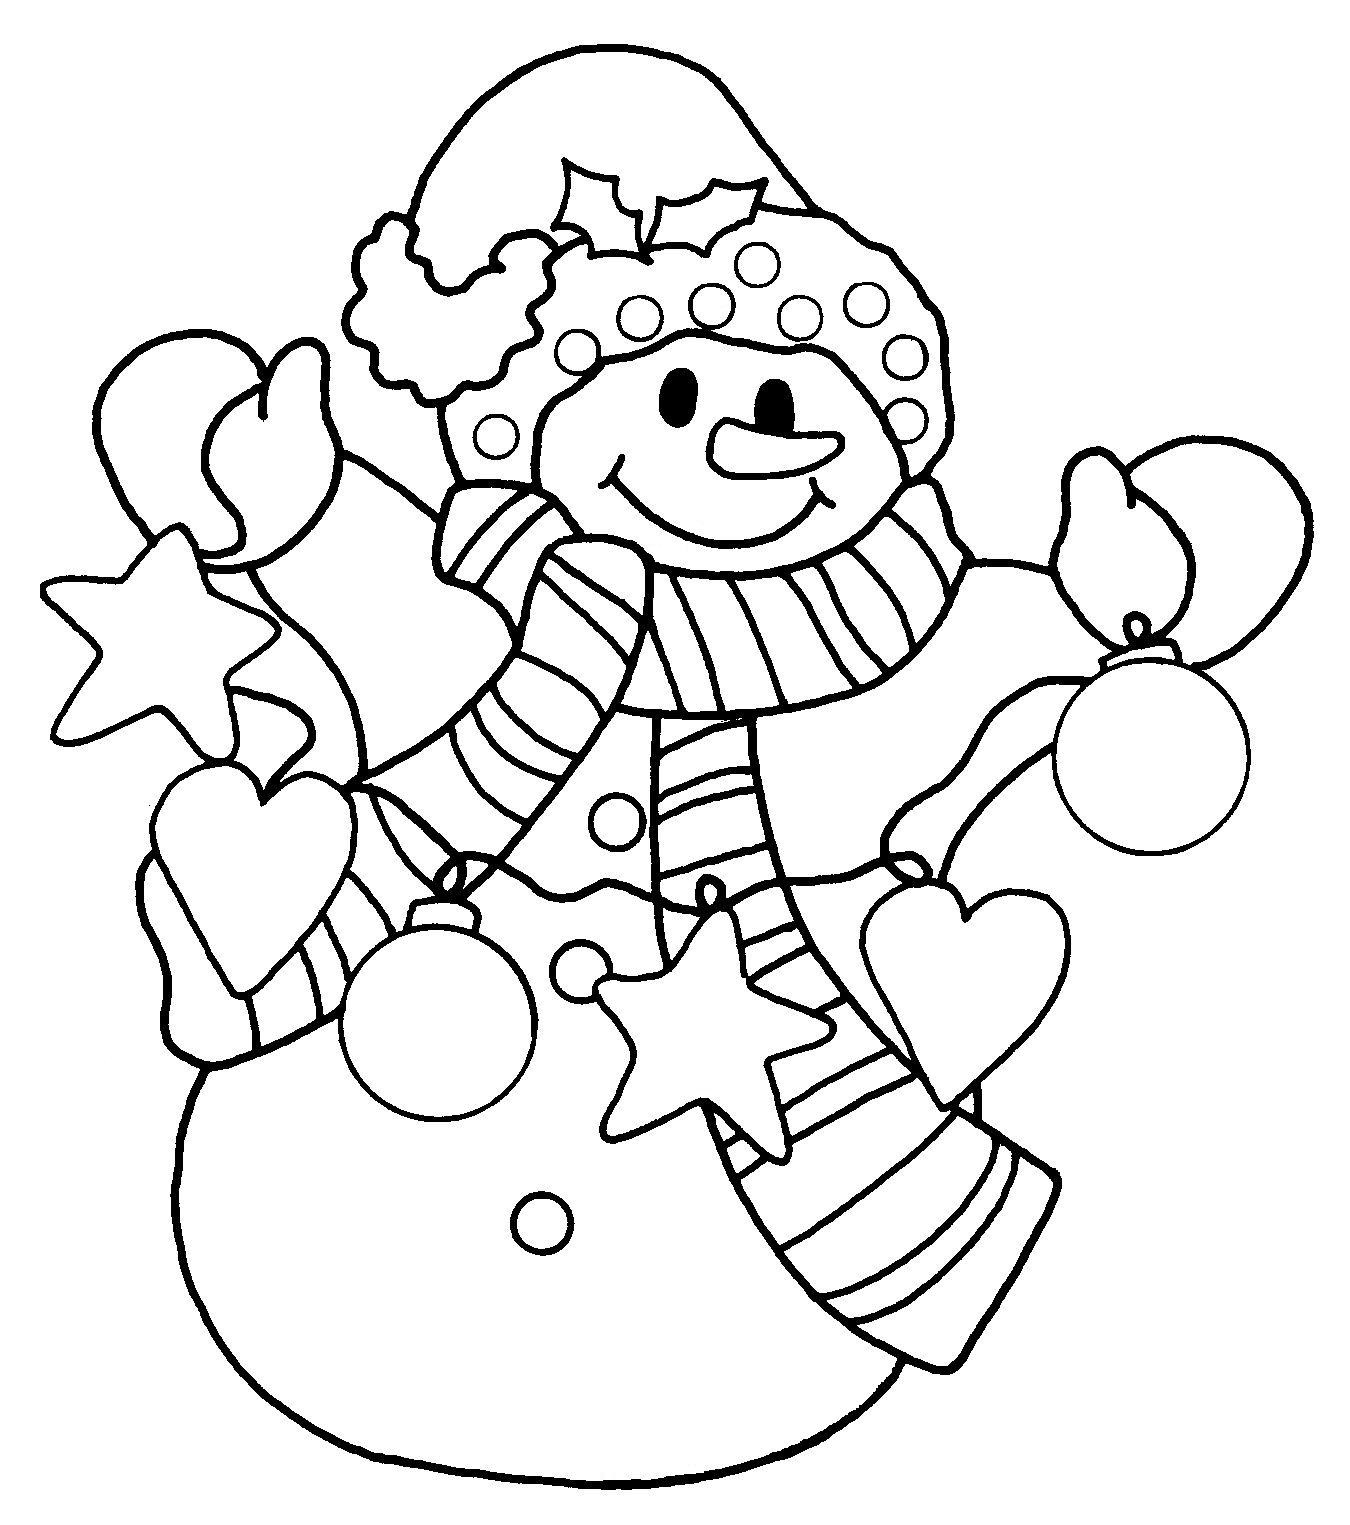 Free Printable Christmas Coloring Pages
 DZ Doodles Digital Stamps Oodles of Doodles News Freebie